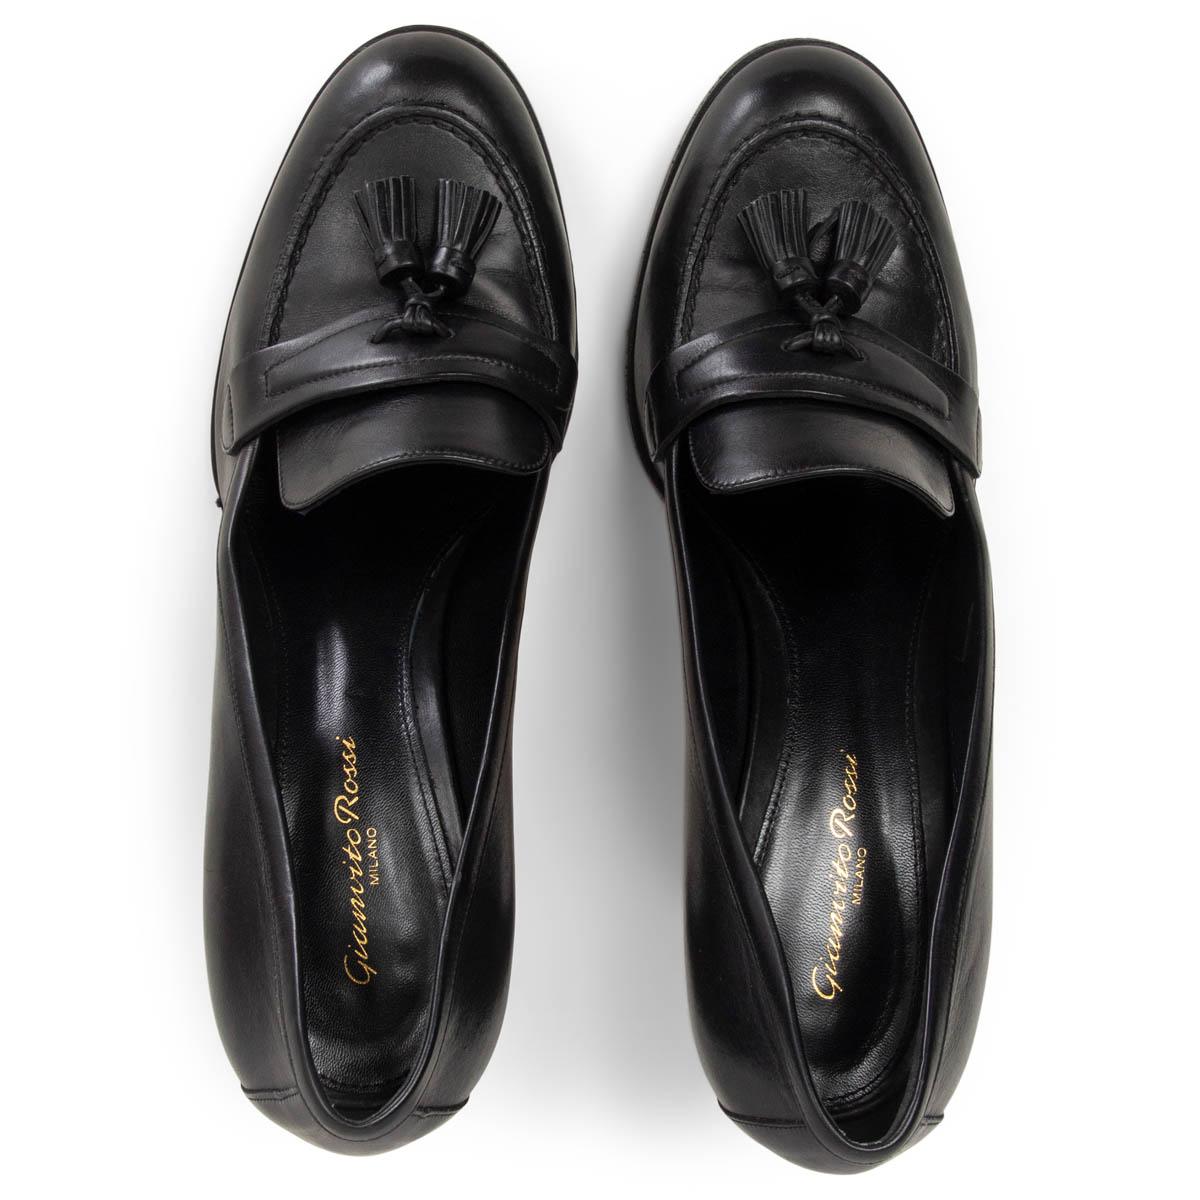 GIANVITO ROSSI black leather TASSEL LOAFER Pumps Shoes 41 In Excellent Condition For Sale In Zürich, CH